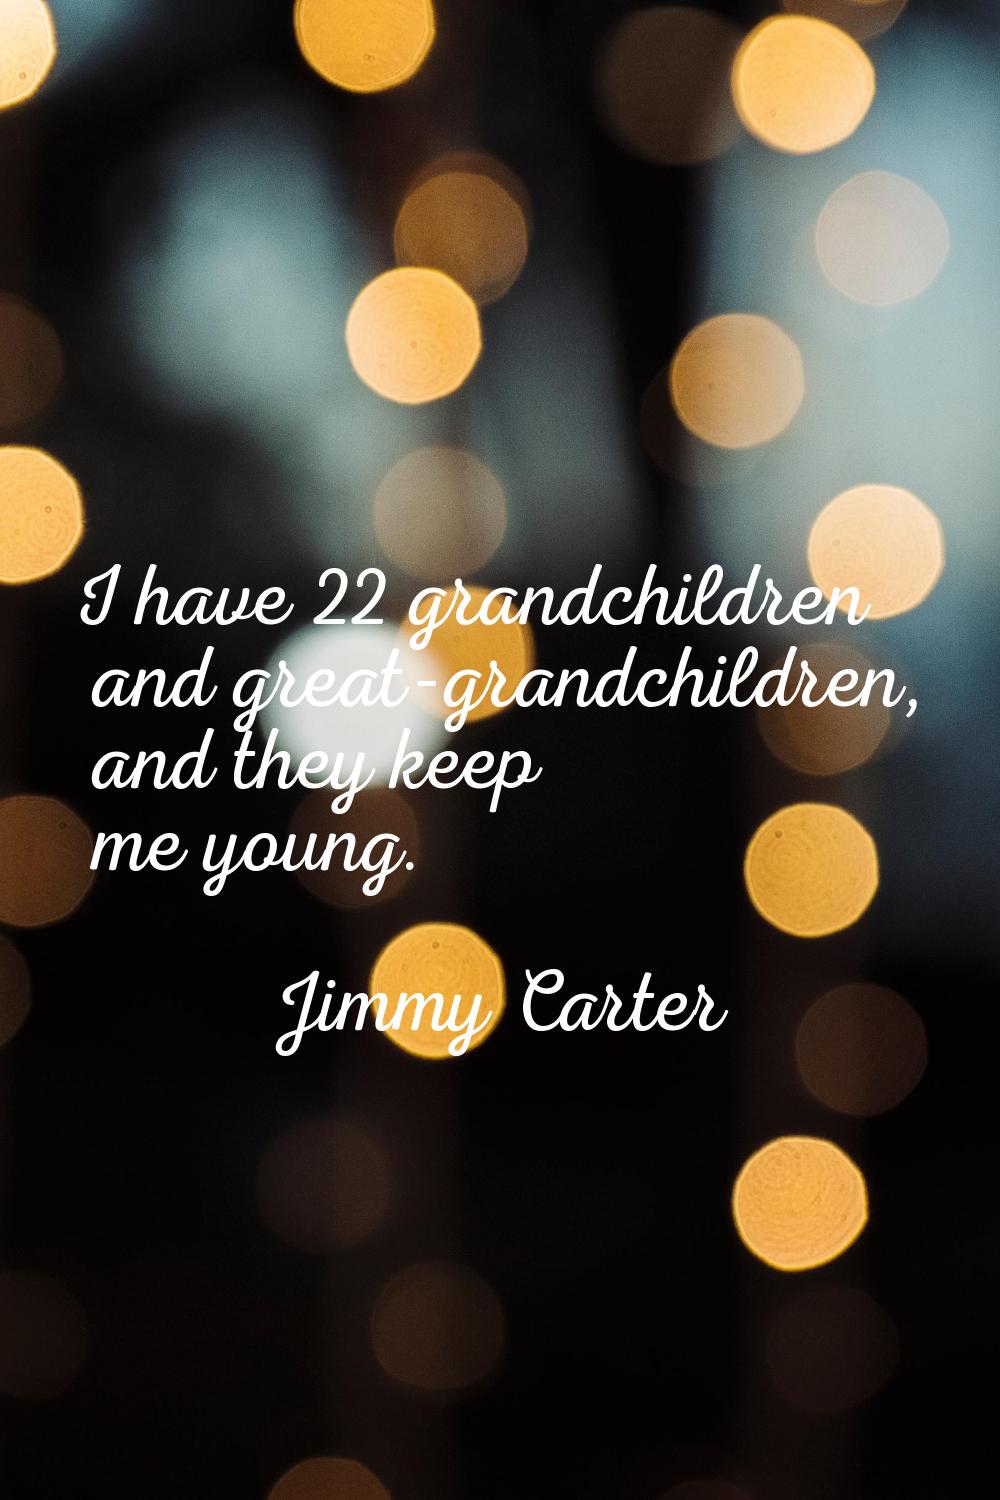 I have 22 grandchildren and great-grandchildren, and they keep me young.